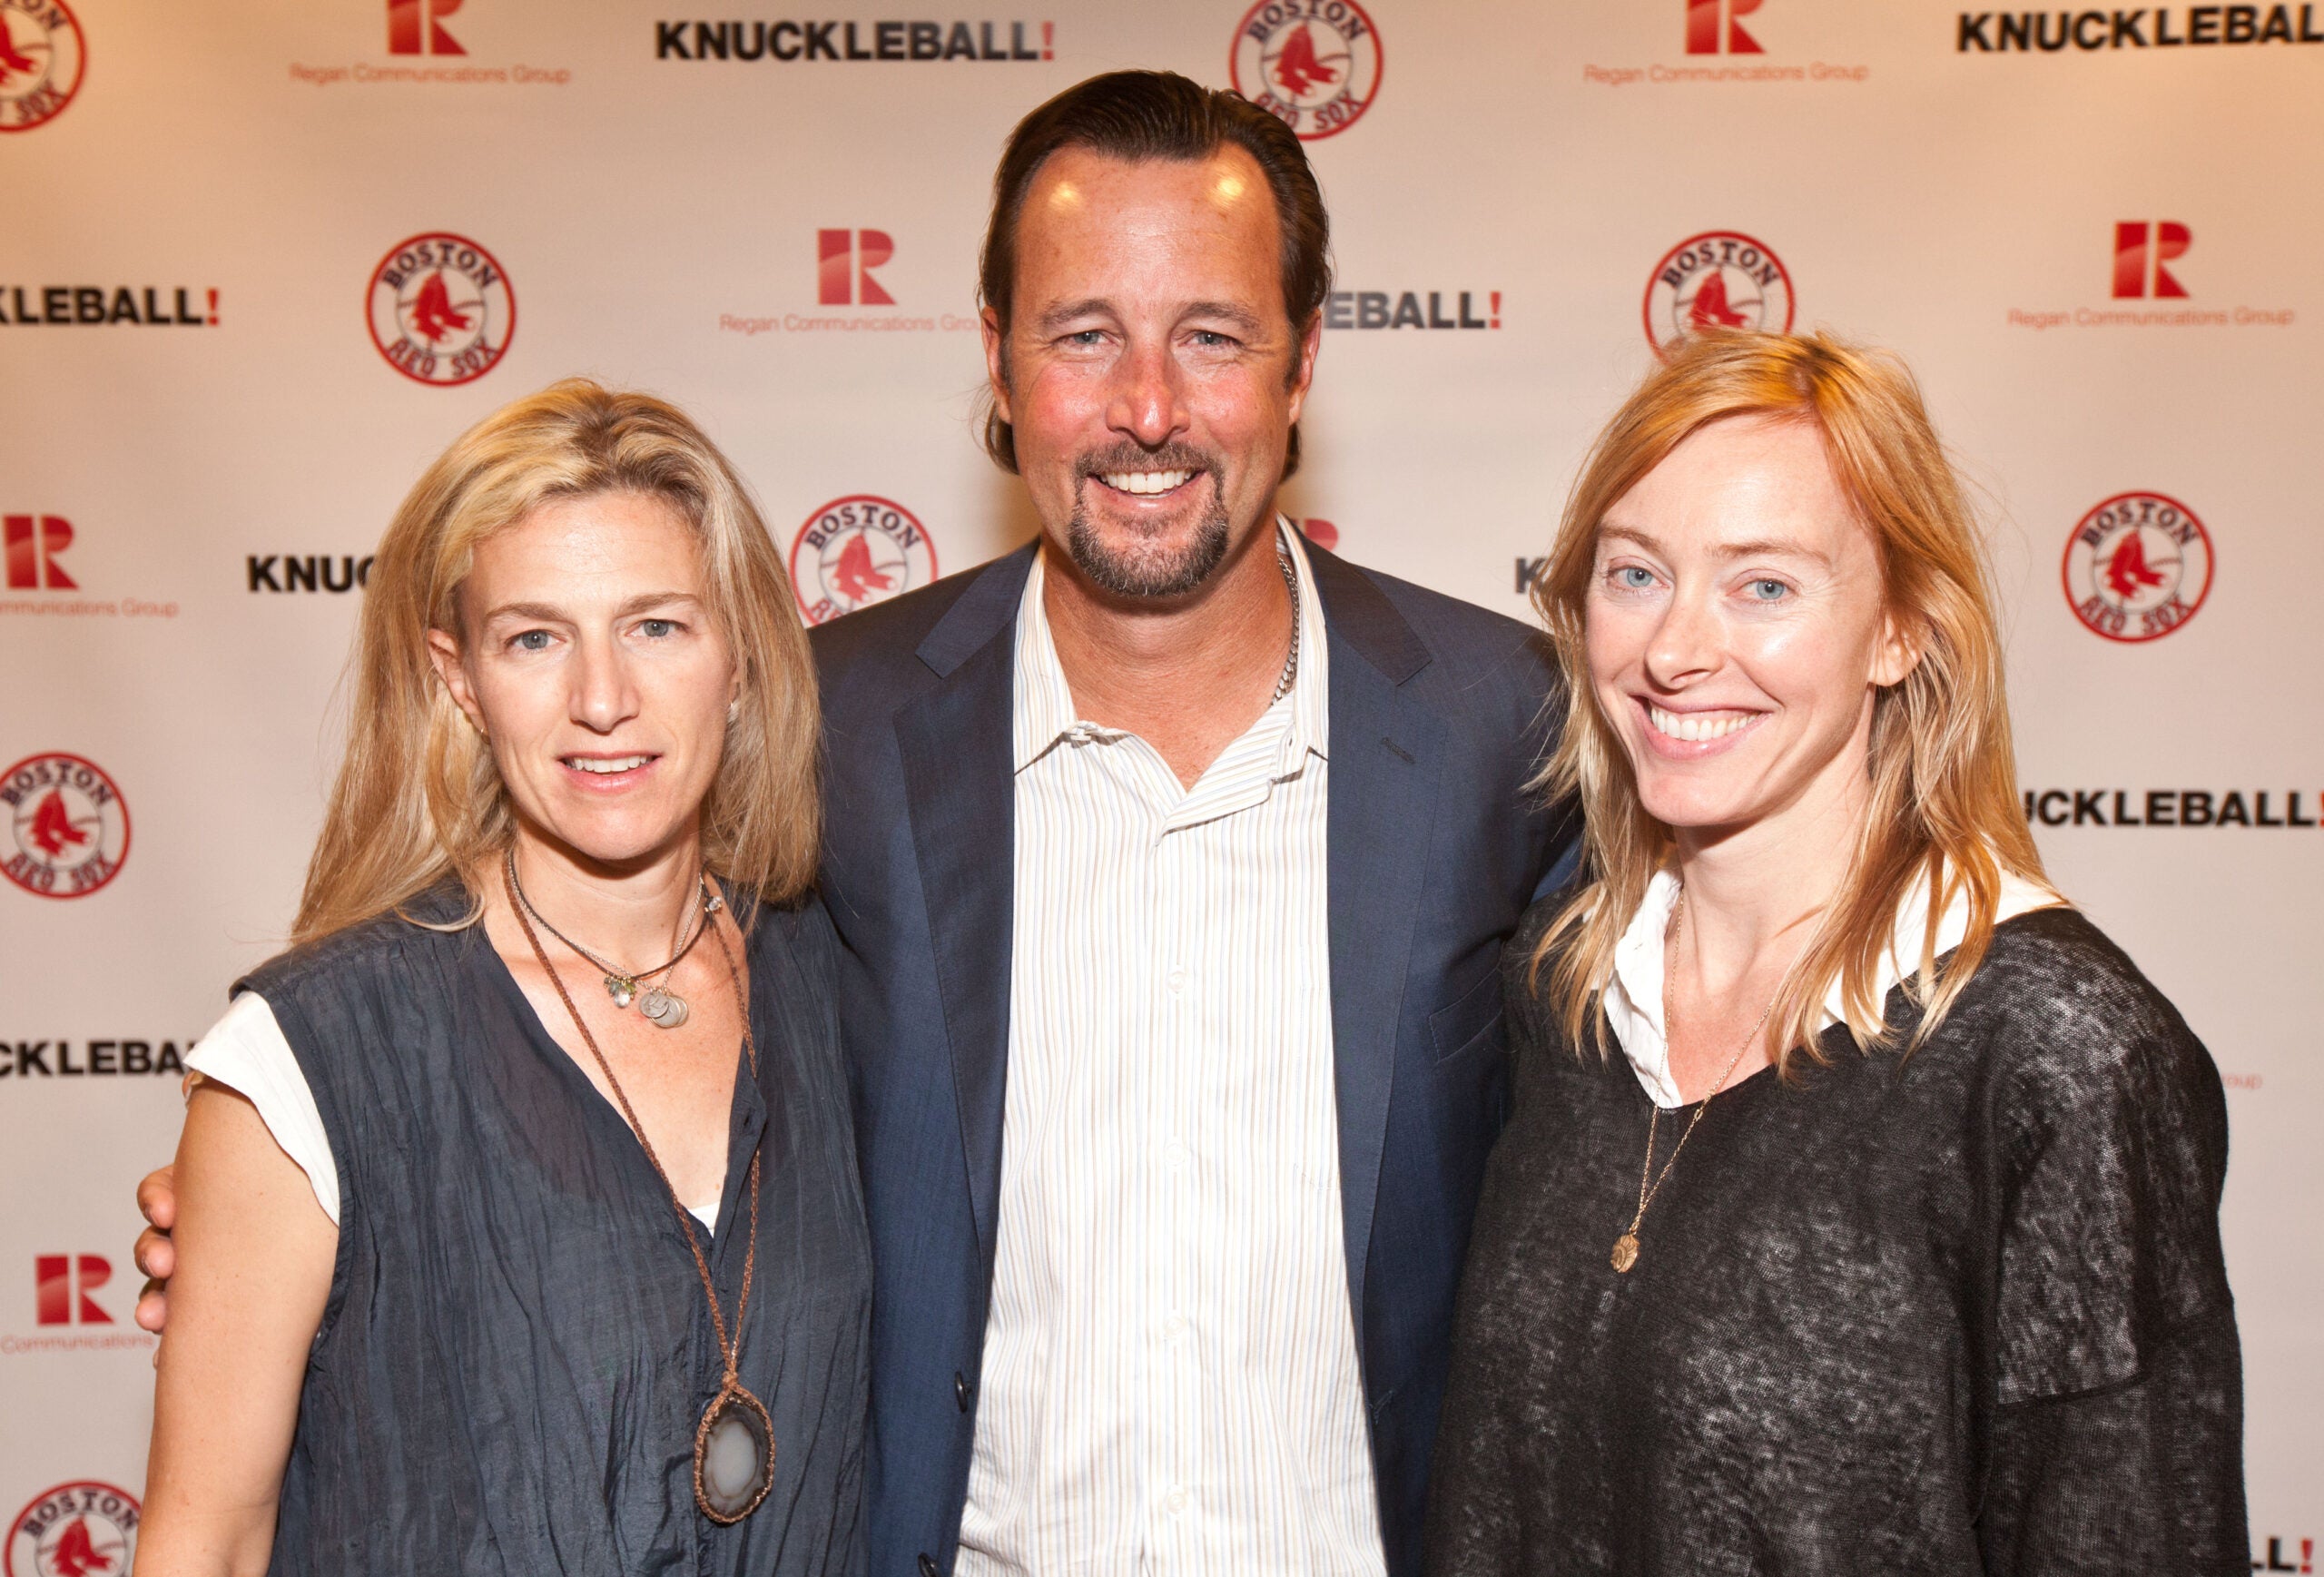 It's life after 'Kuckleball' for Tim Wakefield